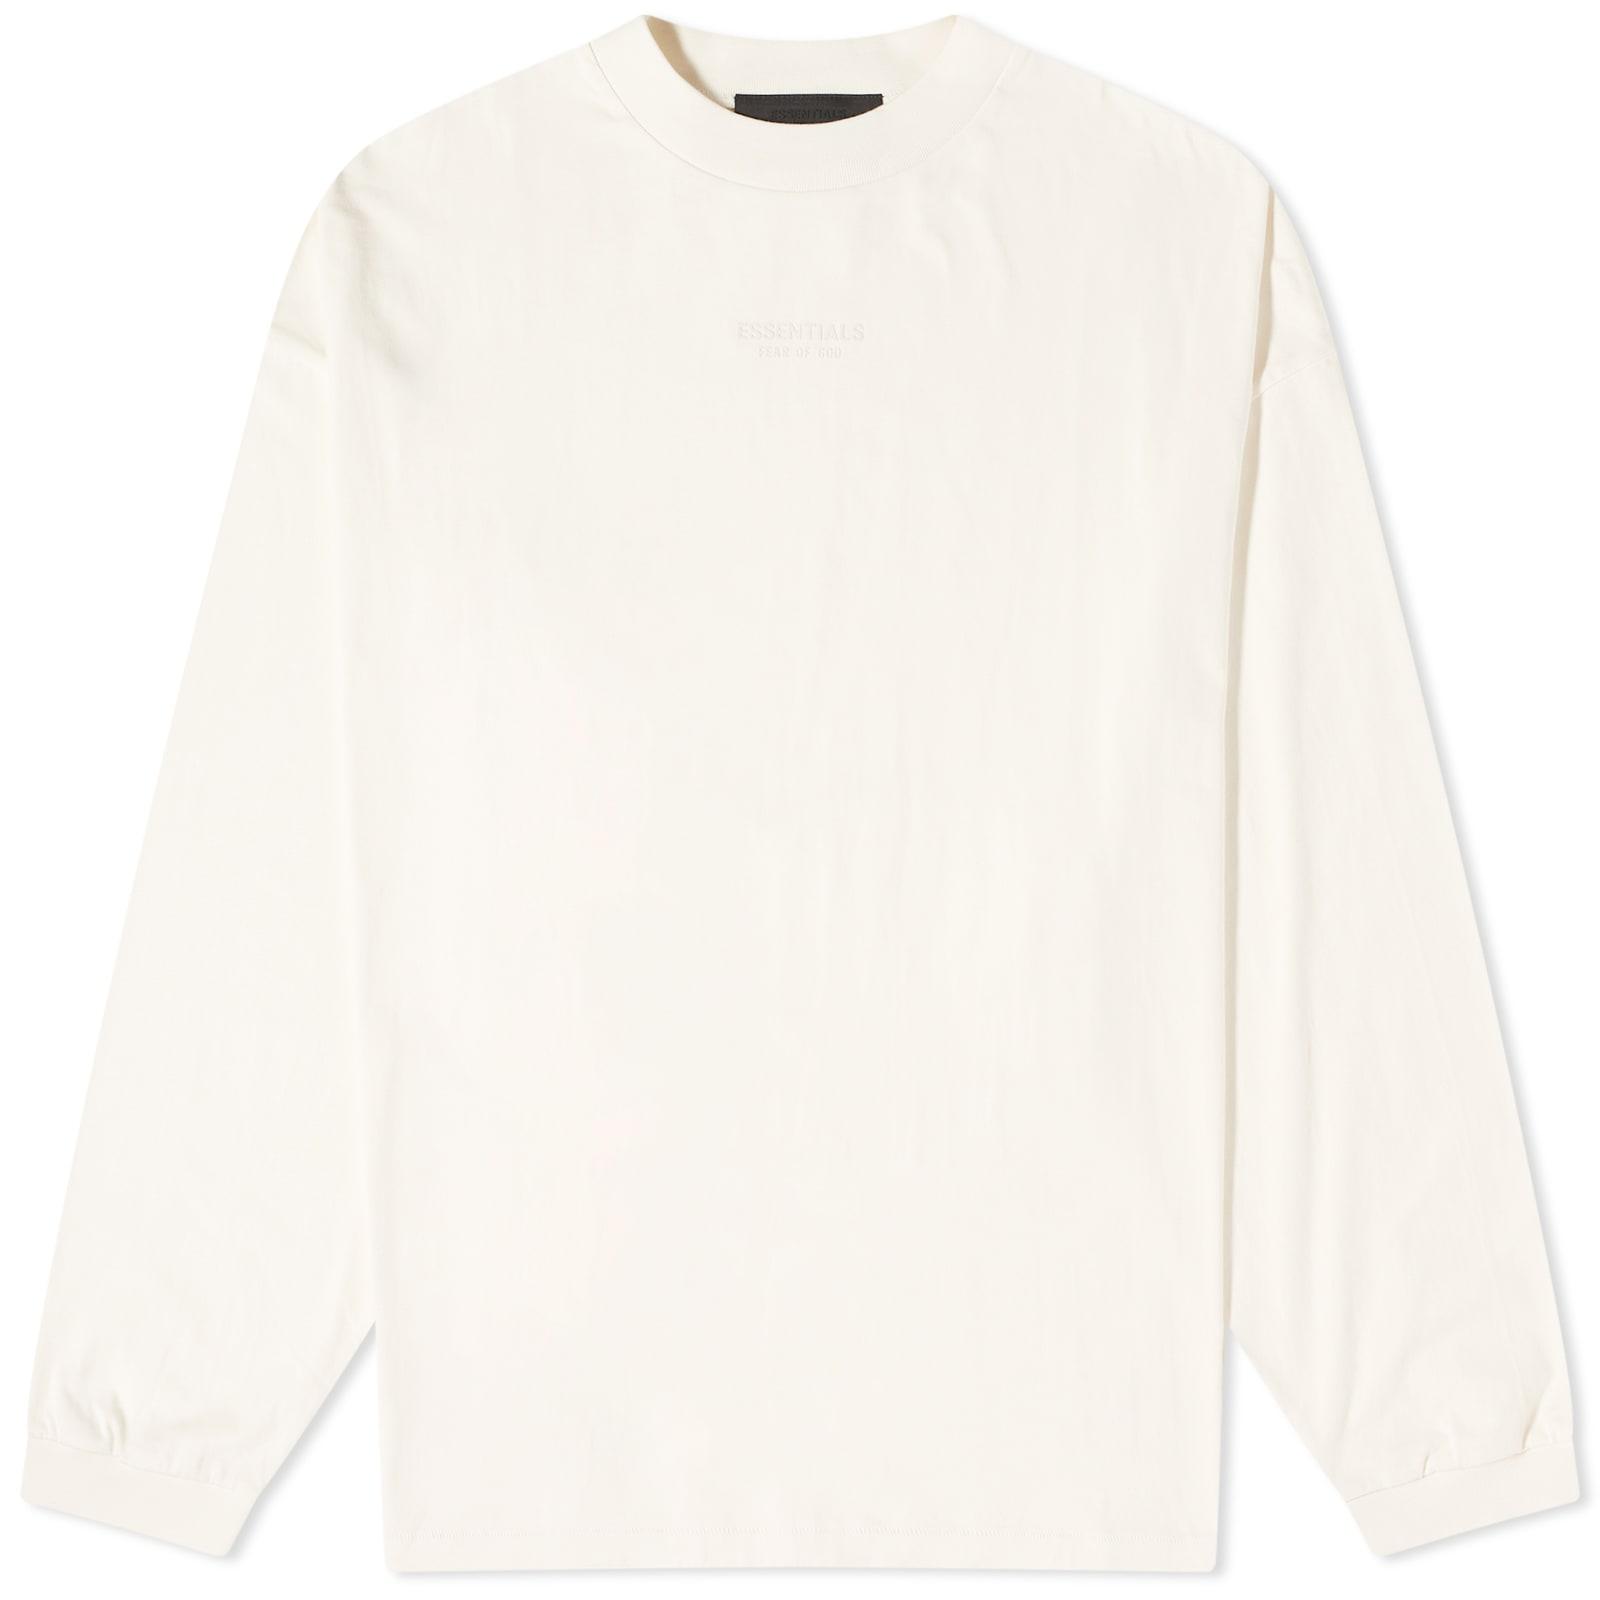 Fear of God ESSENTIALS Essentials Long Sleeve T-shirt in White for